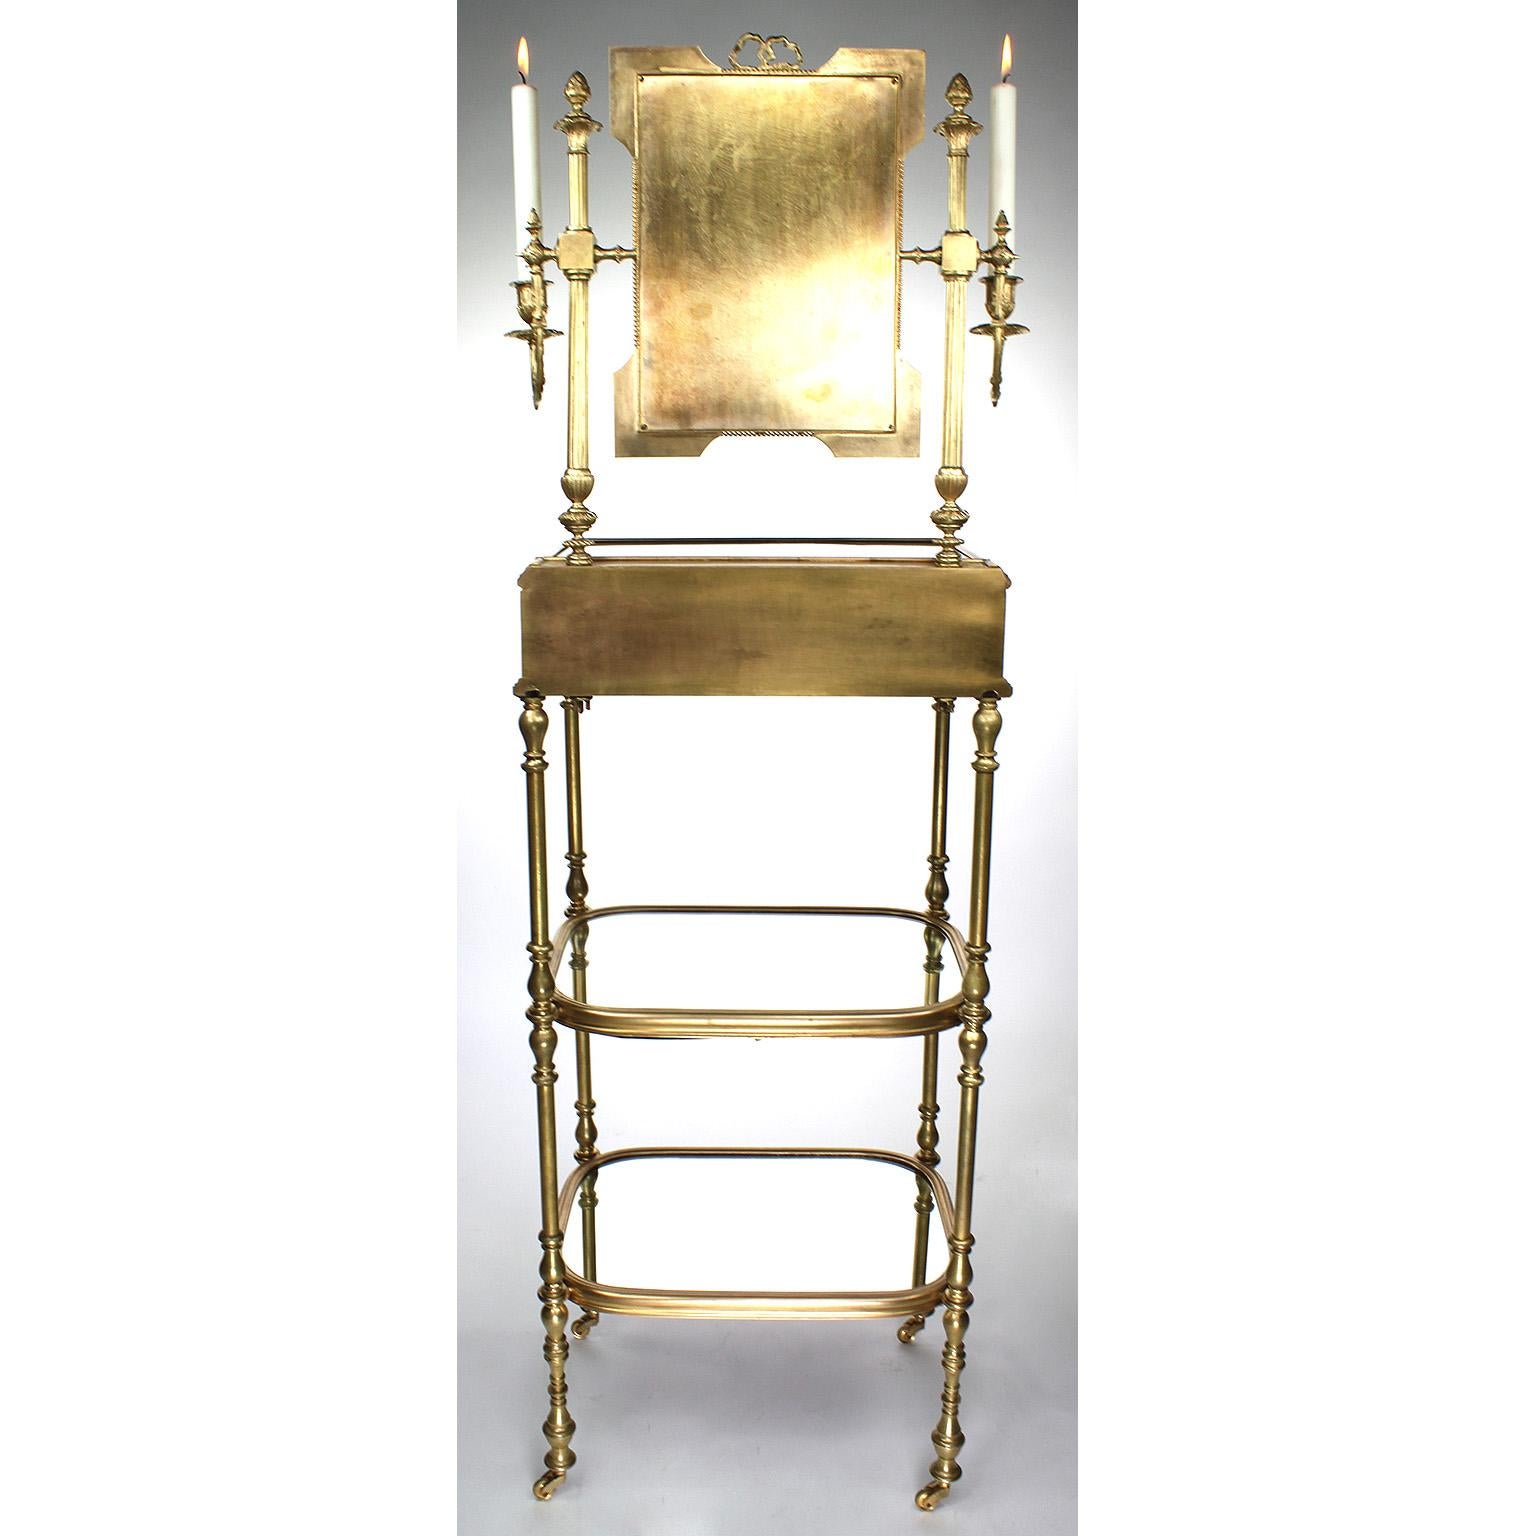 French 19th Century Gilt-Bronze and Pietra Dura Vanity Stand, Attr. Tahan, Paris For Sale 13